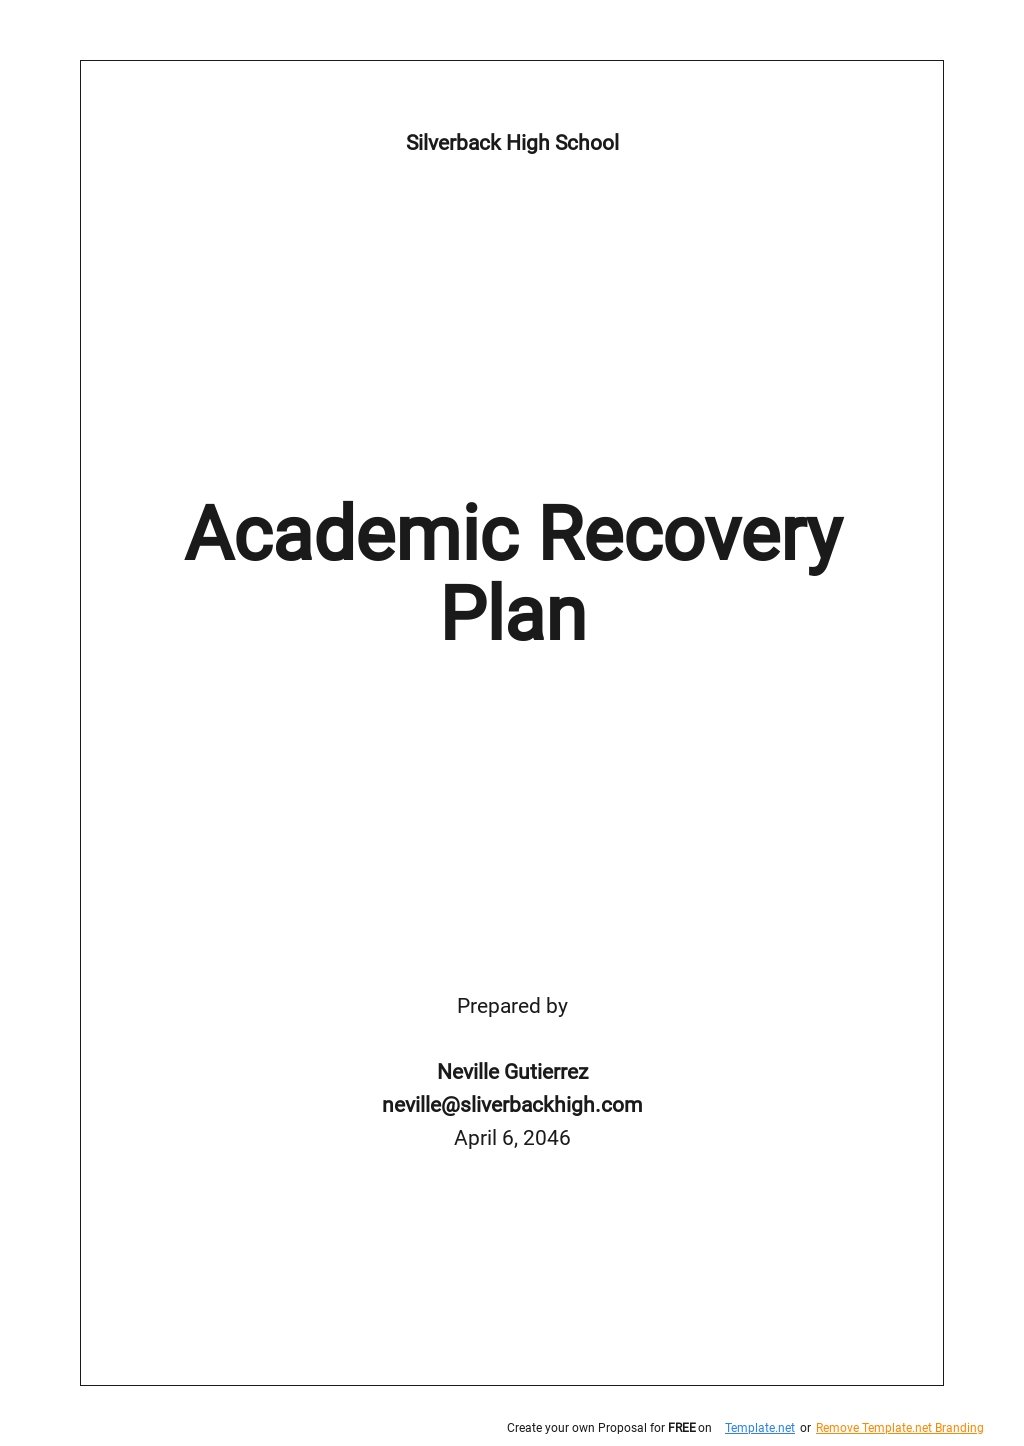 Academic Recovery Plan Template